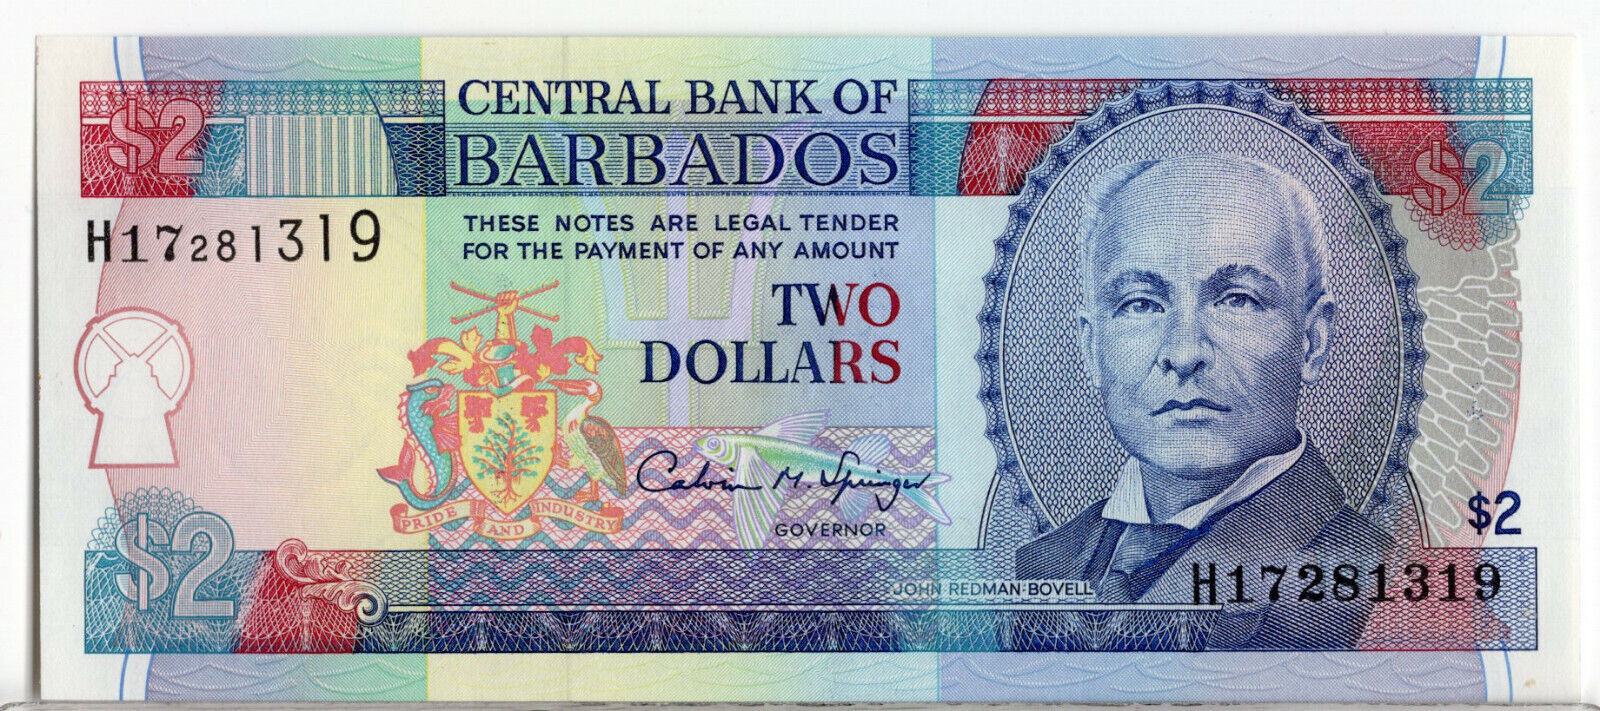 Central Bank of Barbados $2 Two Dollars P46 UNC 